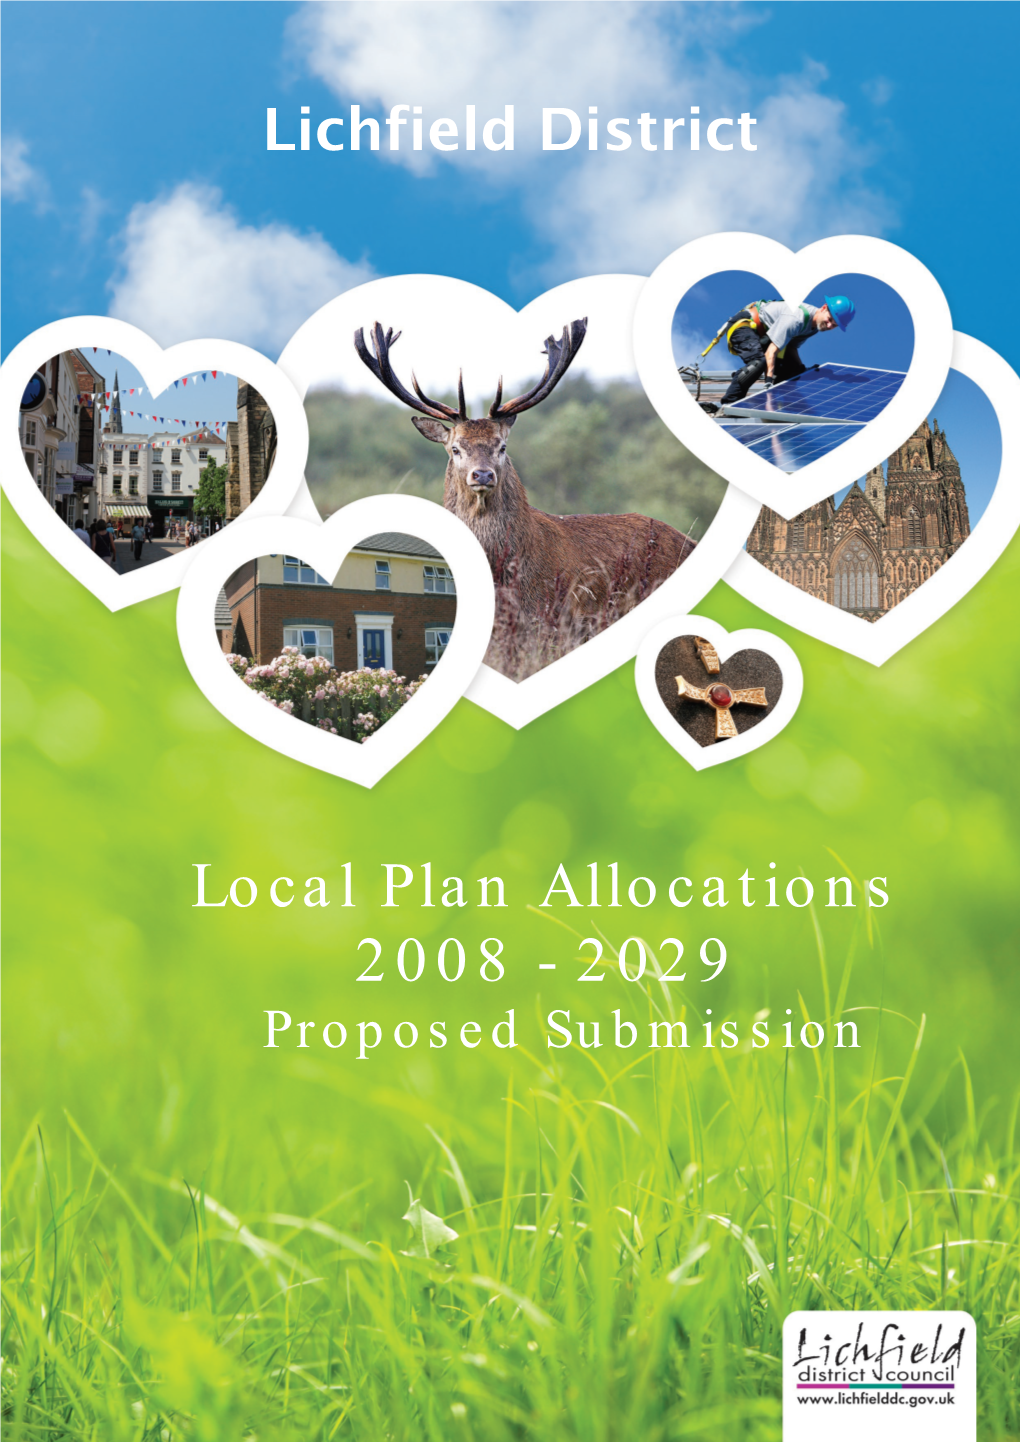 Local Plan Allocations Proposed Submission